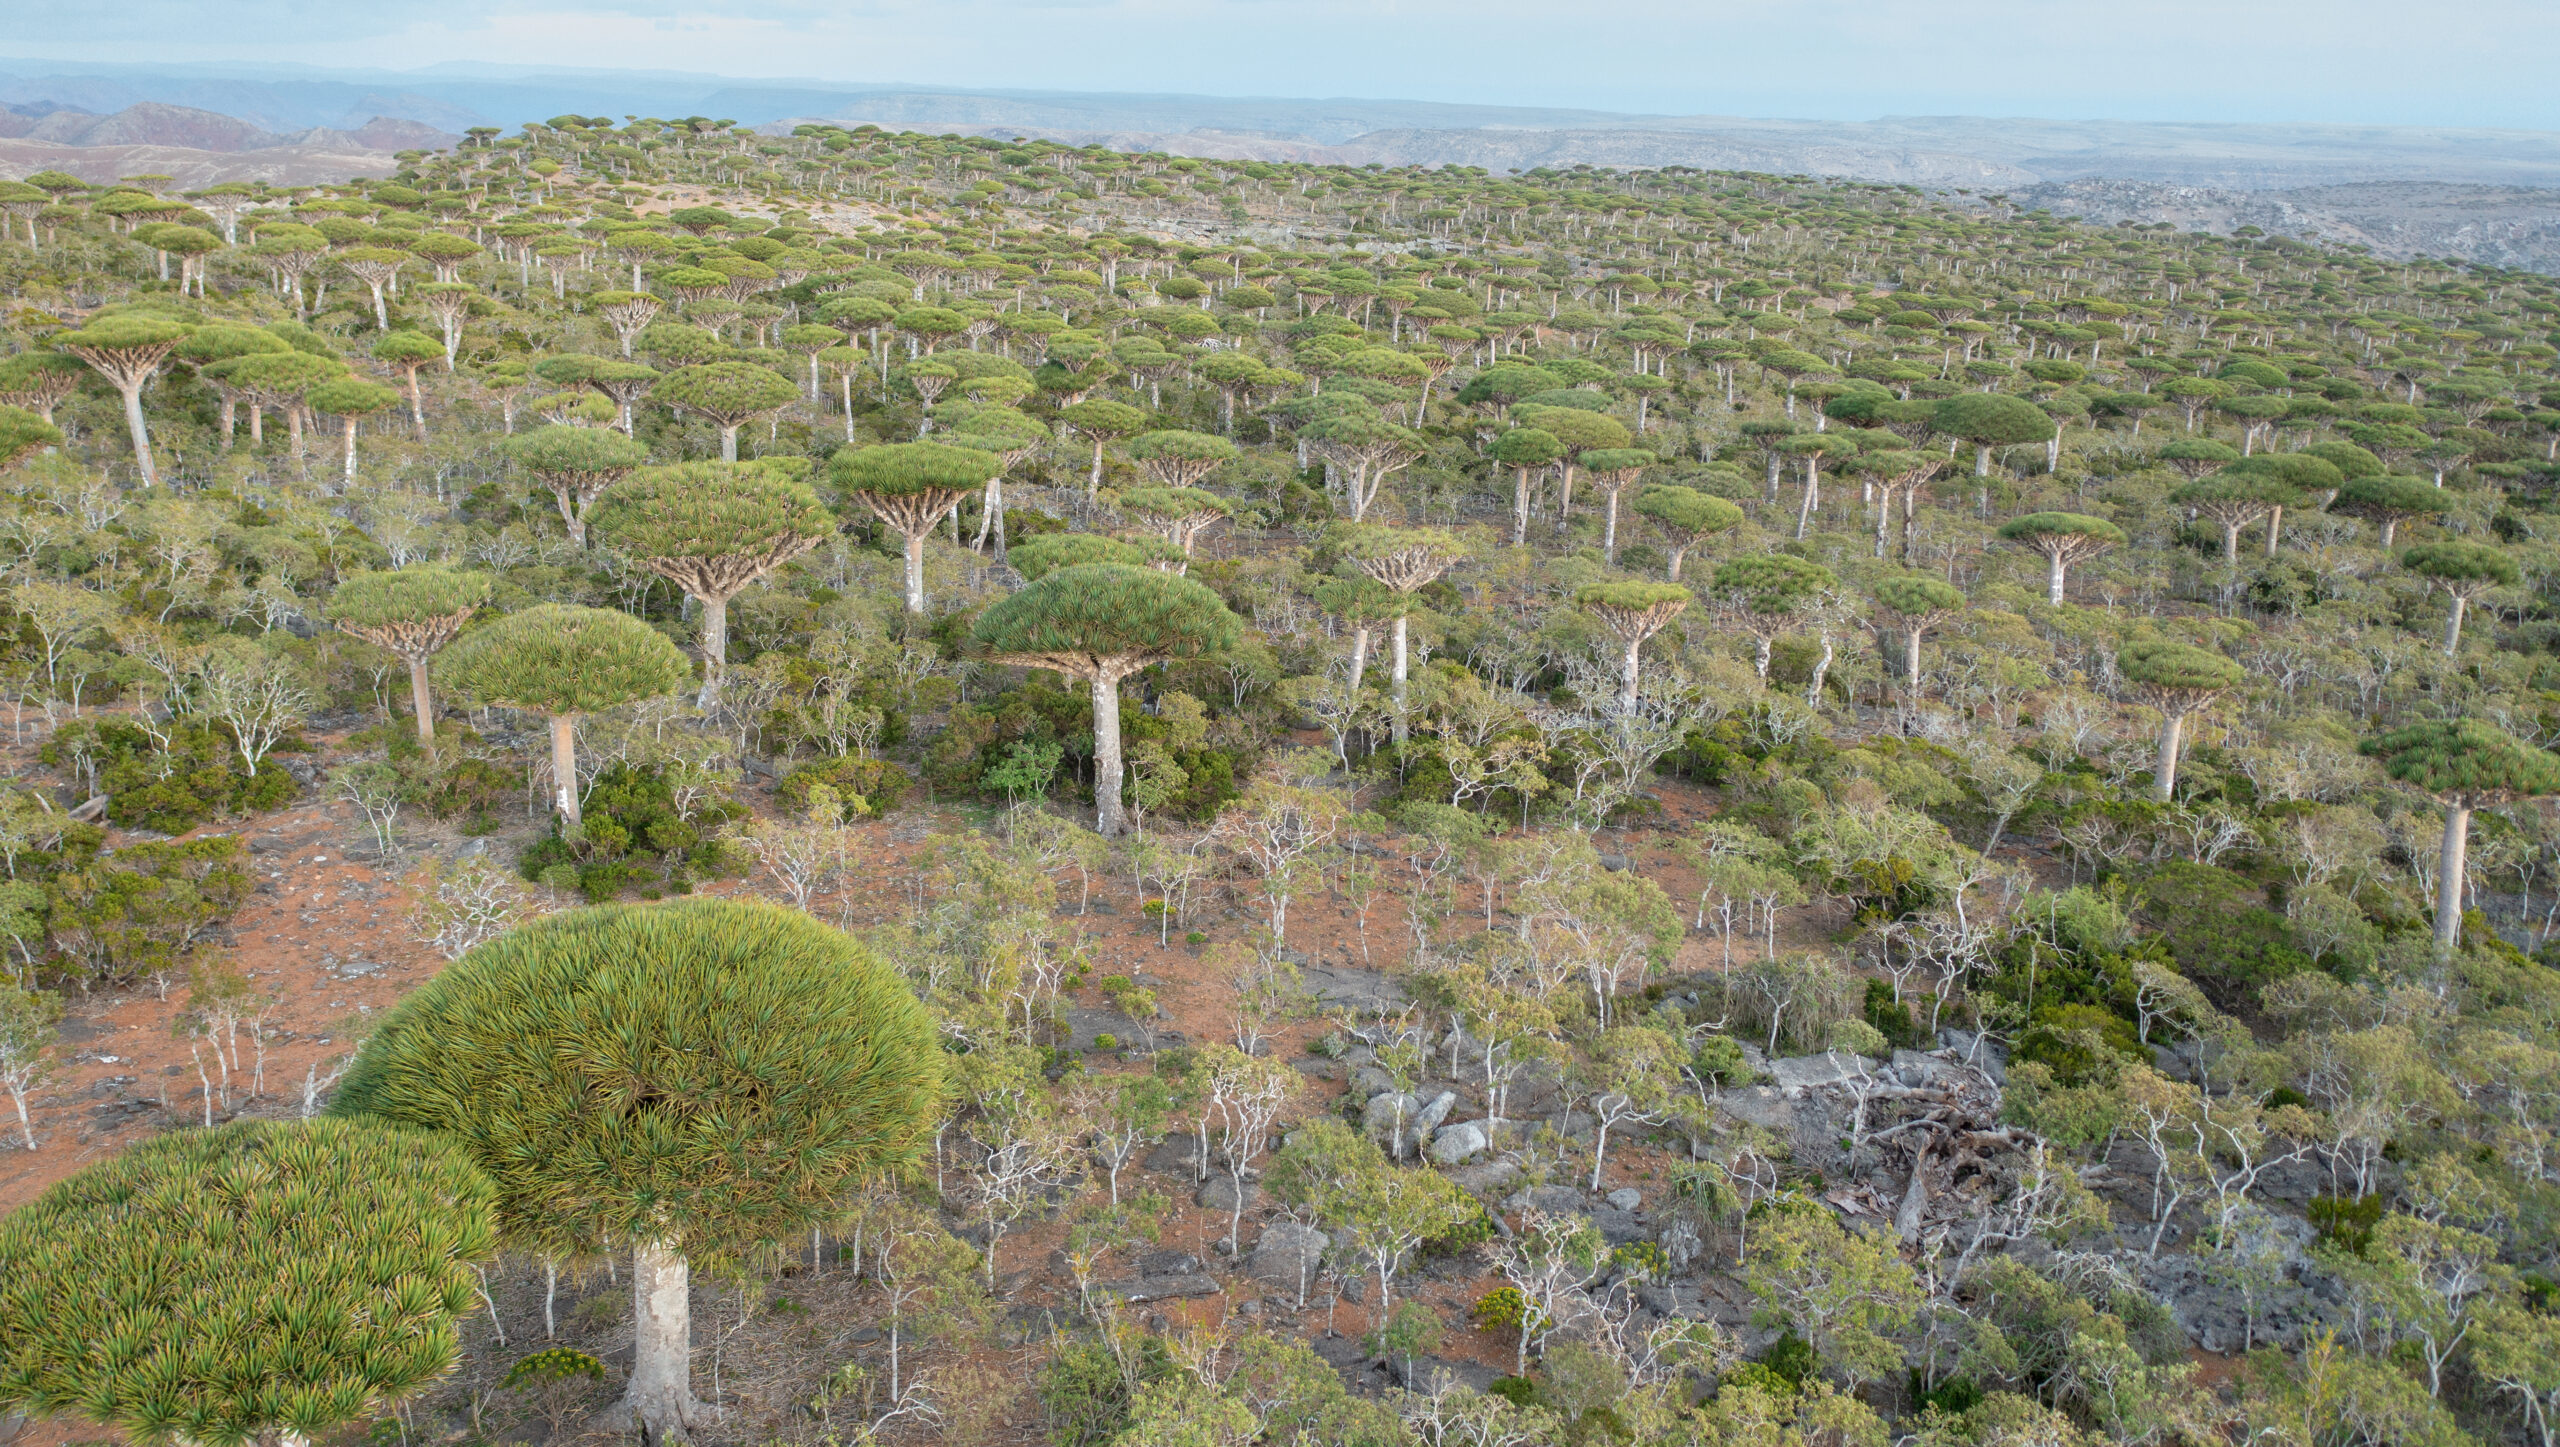 Firhmin Forest, Socotra